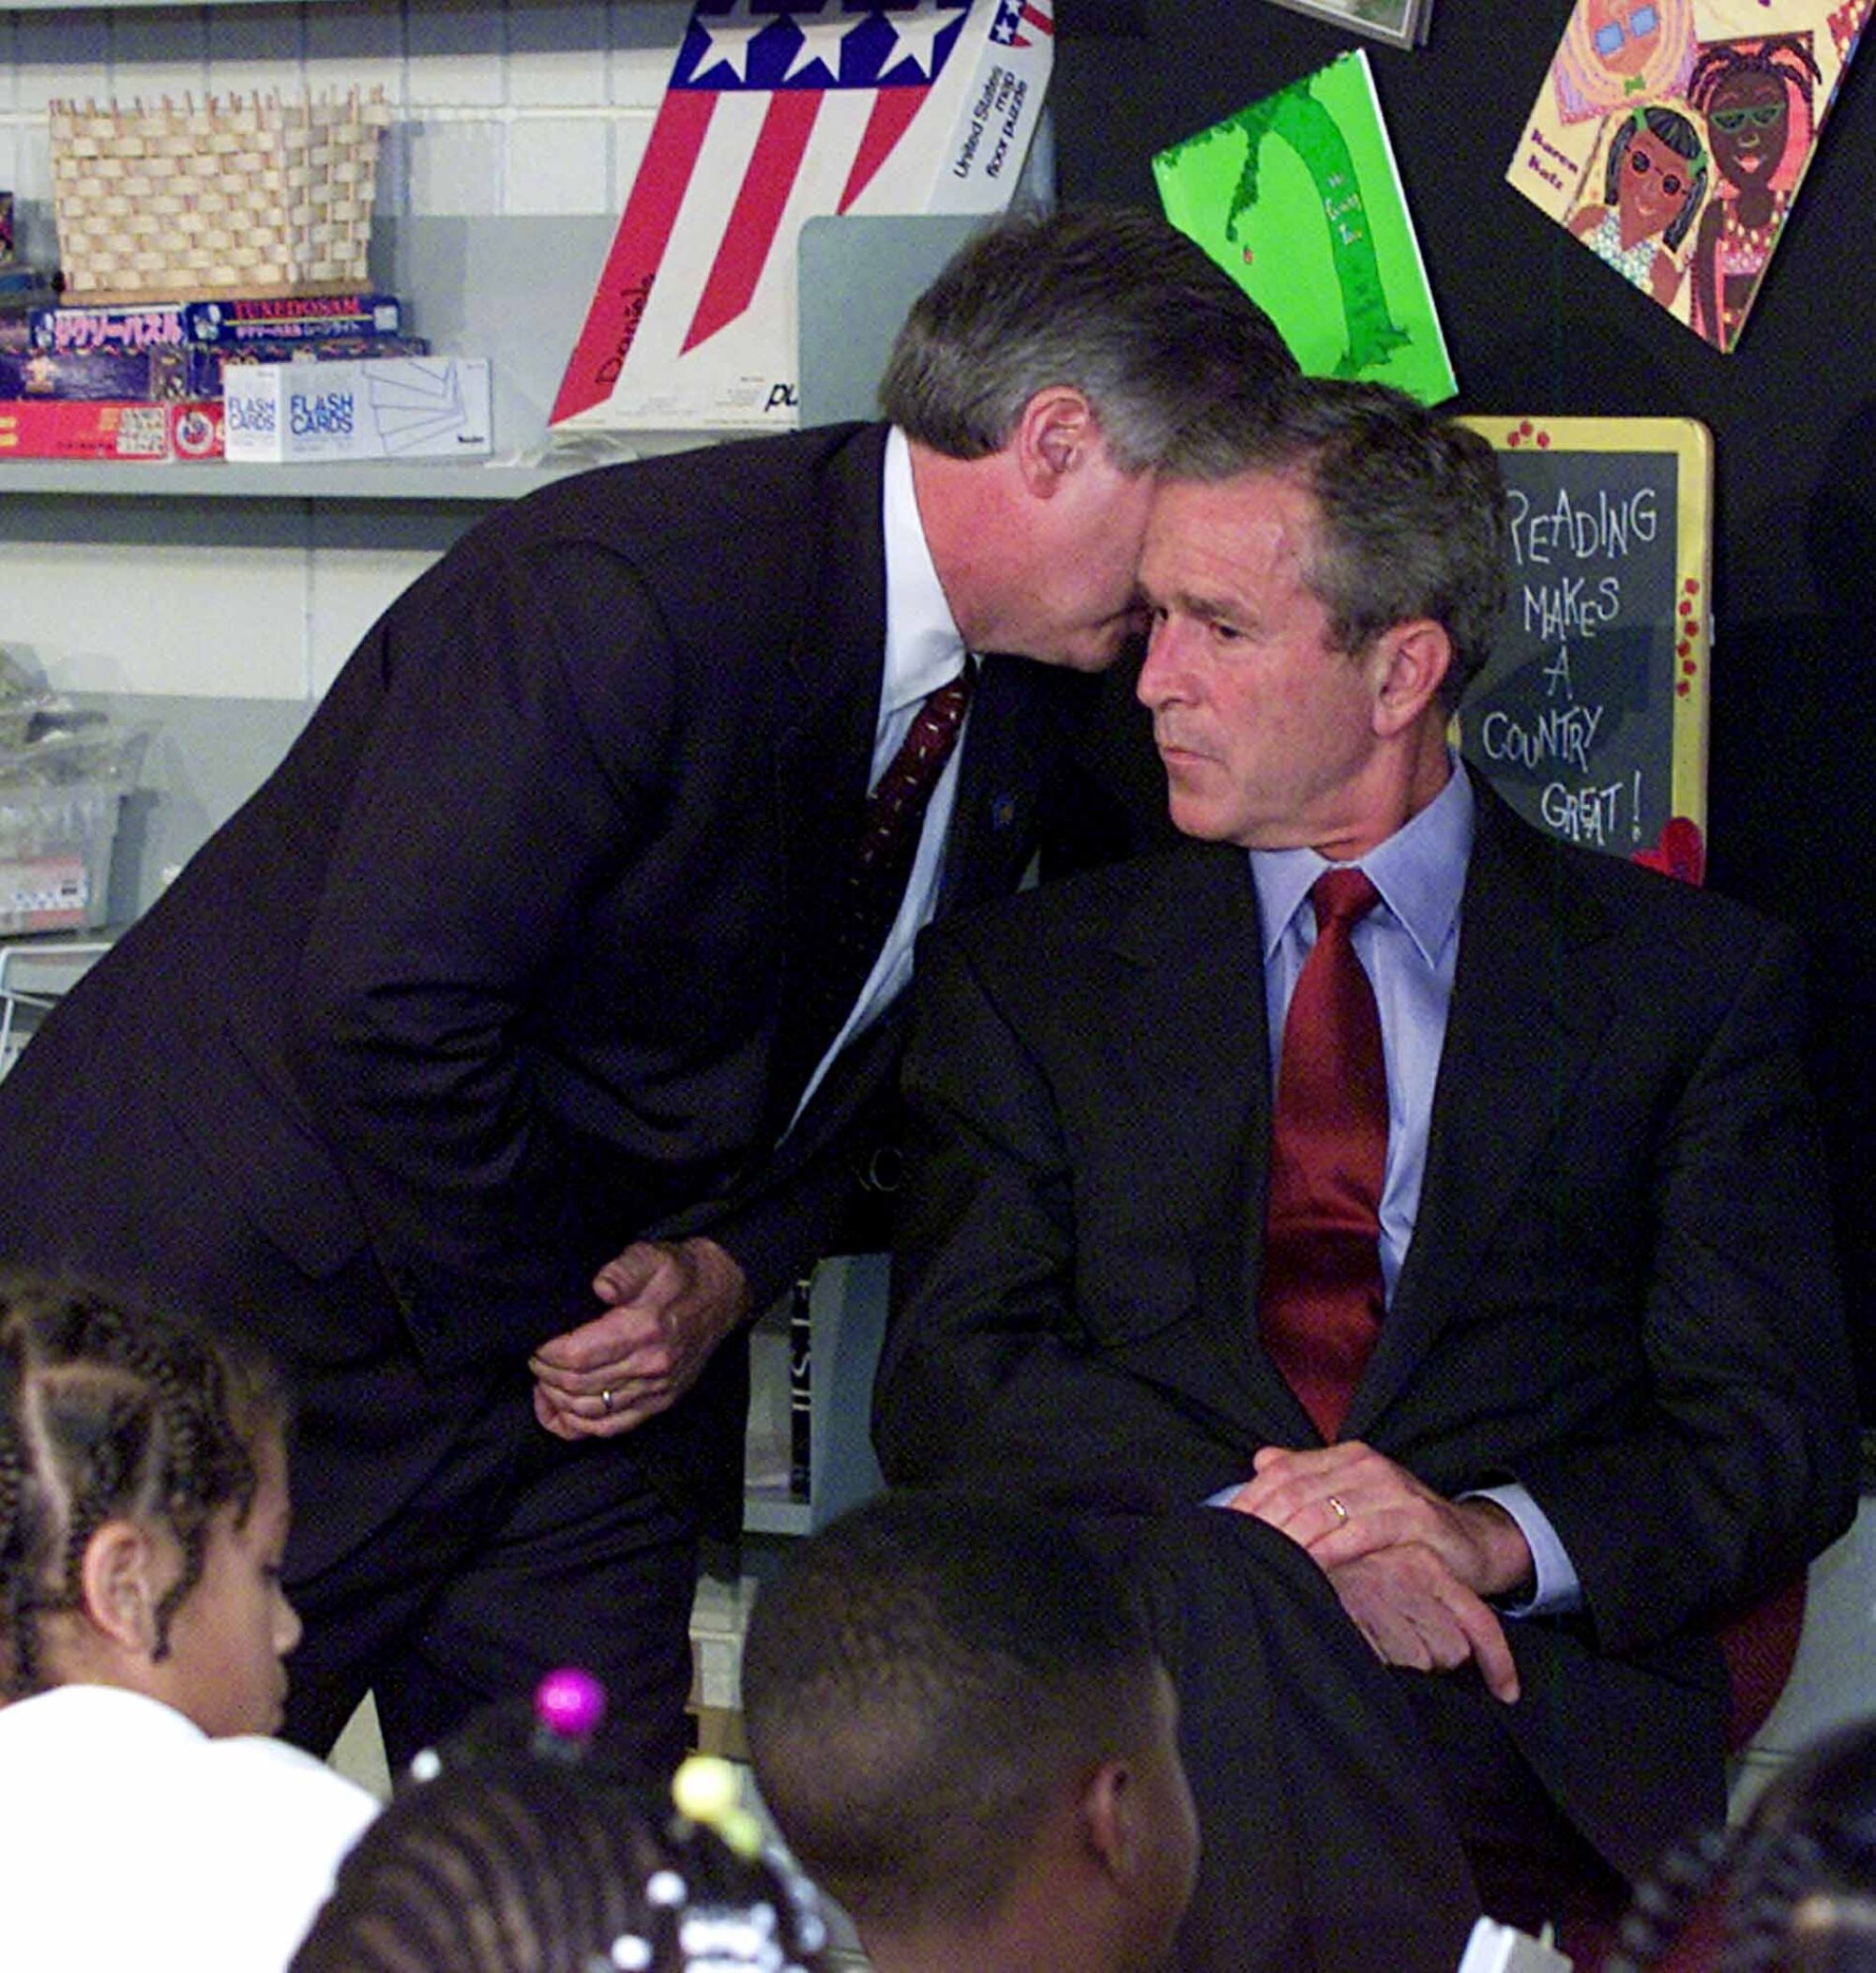  An aide whispers in President Bush's ear as he sits in a classroom